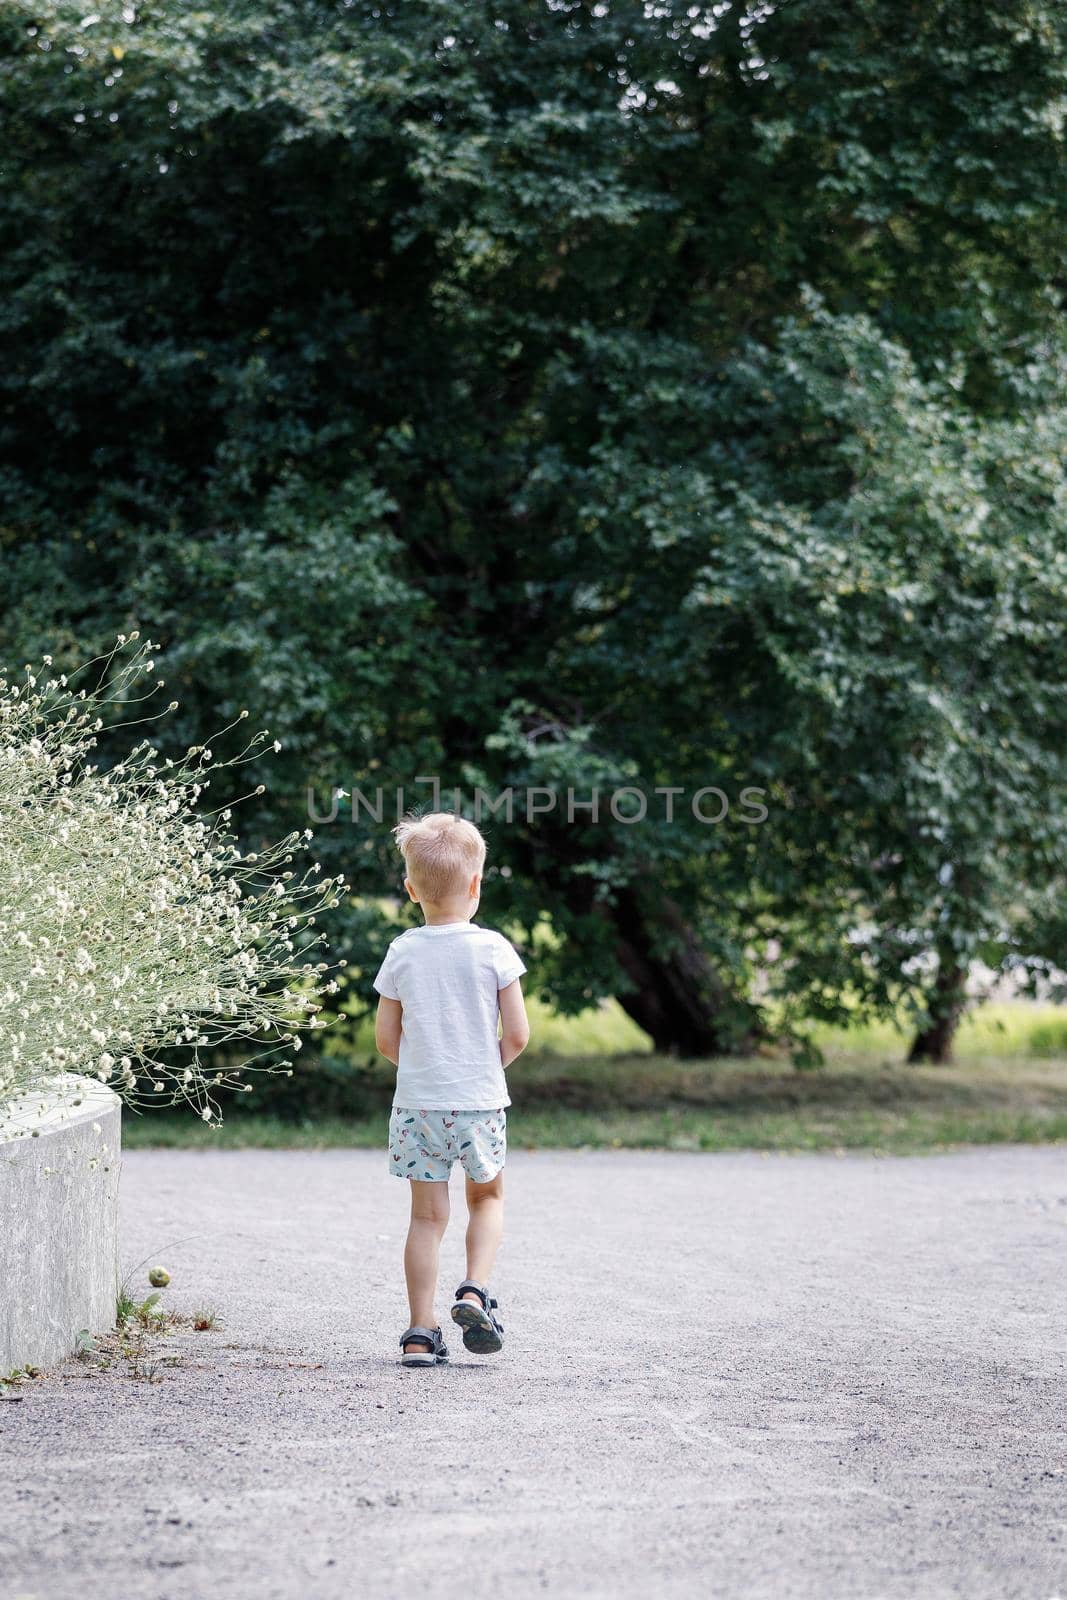 In the summer, a little boy got lost in a park, he looking for his parents.